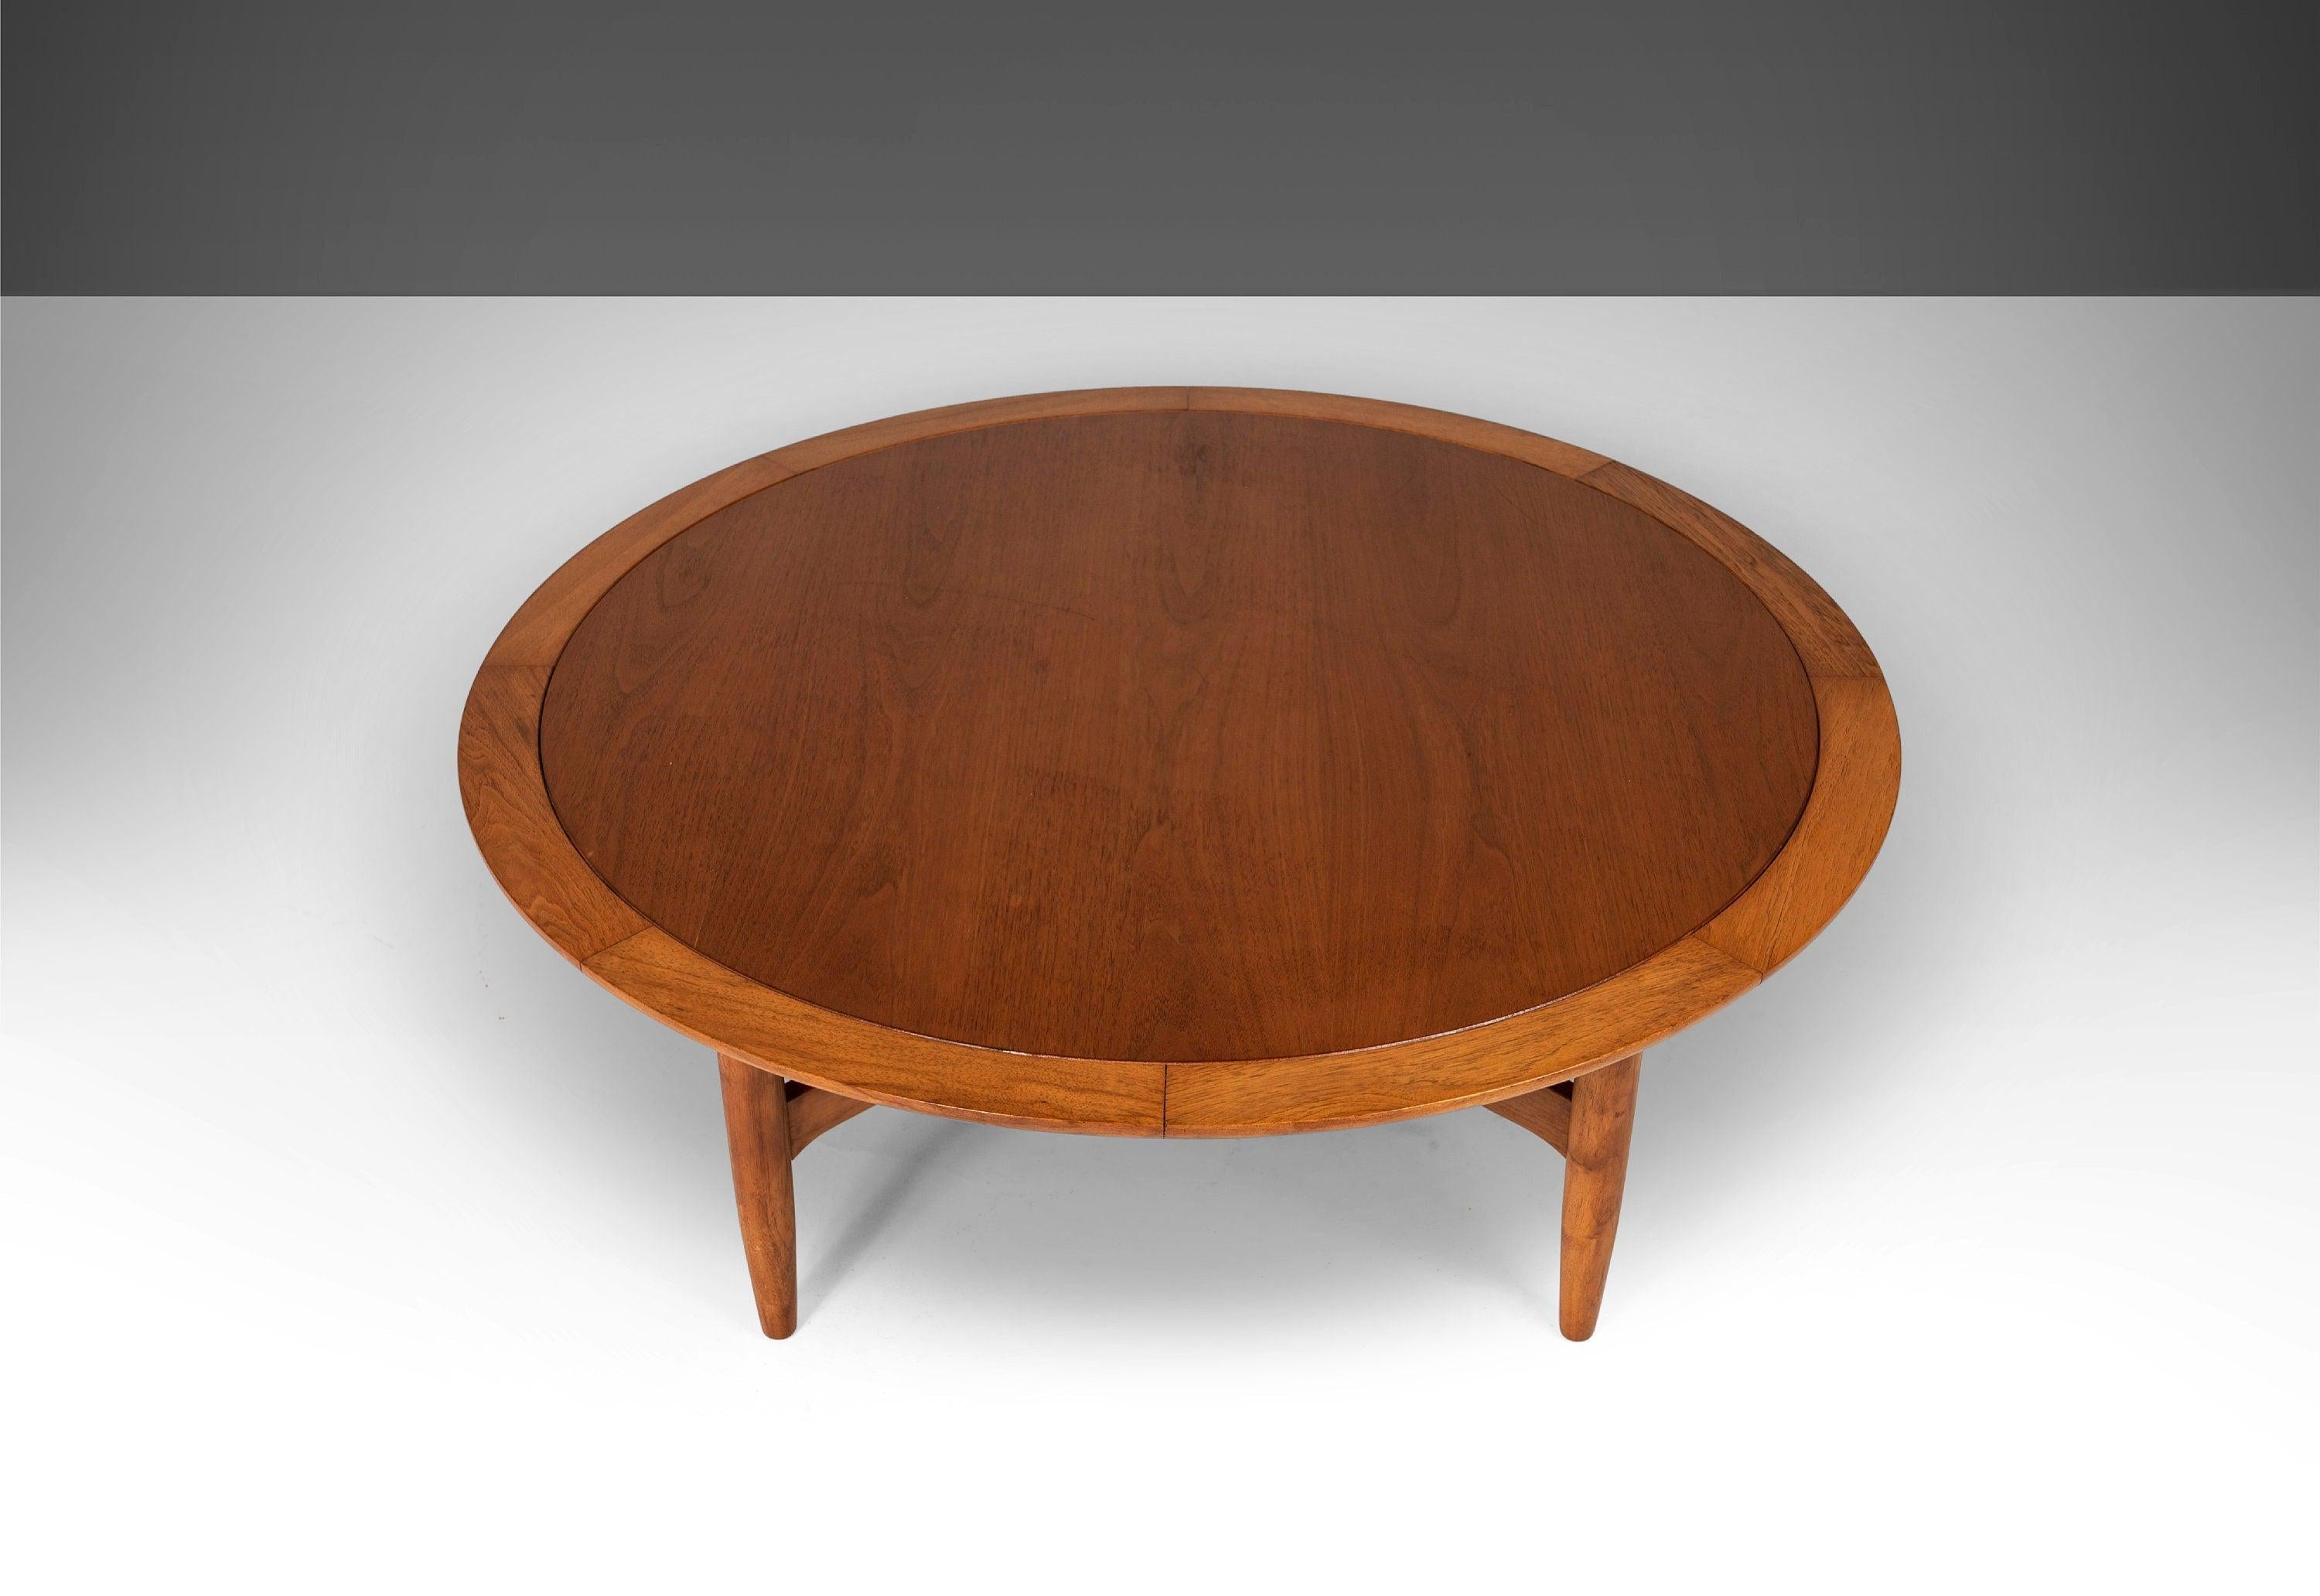 American Round Coffee Table Attributed to Lubberts & Mulder for Tomlinson, c. 1960s For Sale